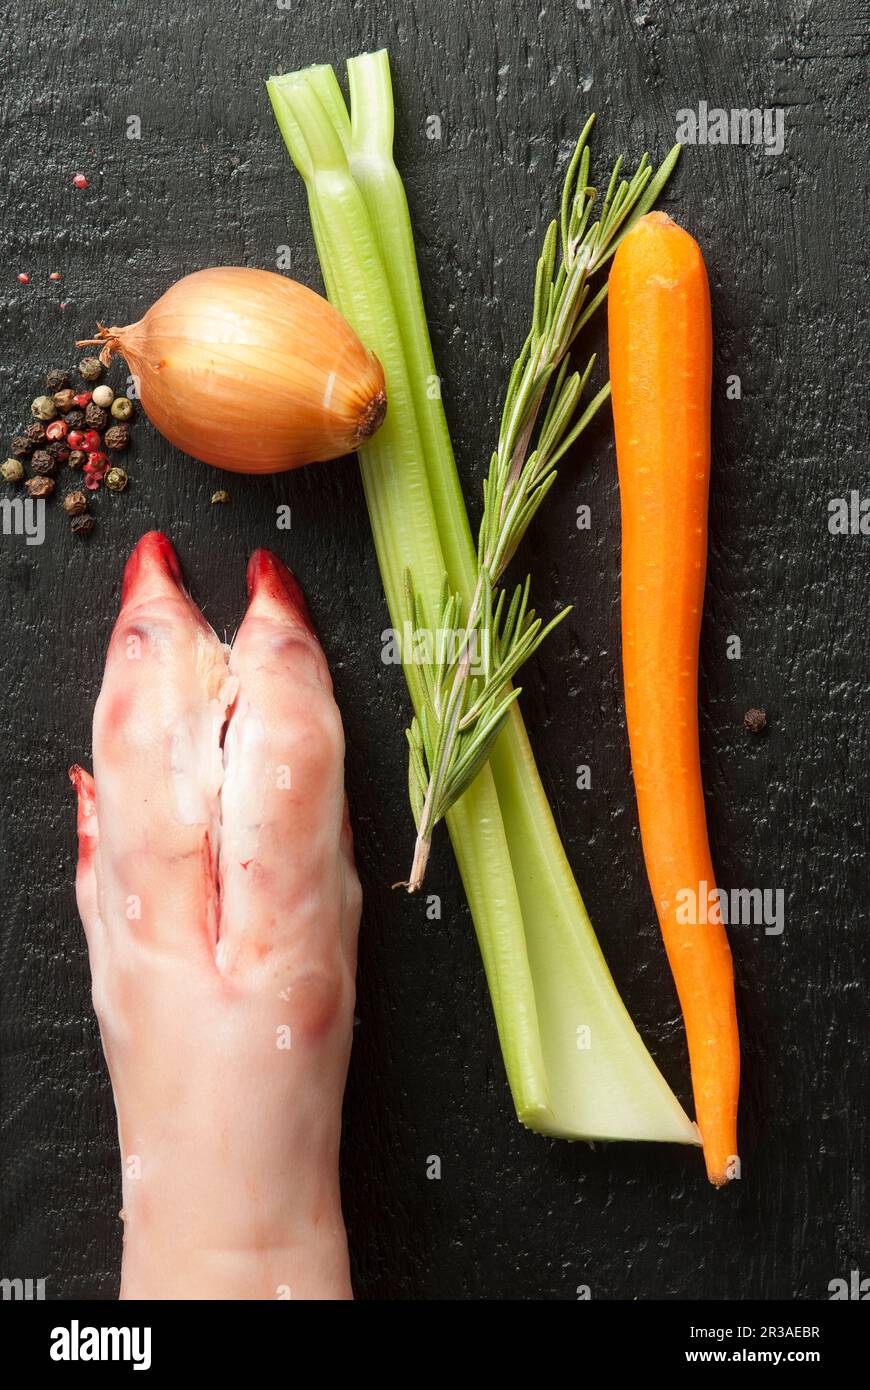 Pork hock and vegetable for stock base Stock Photo